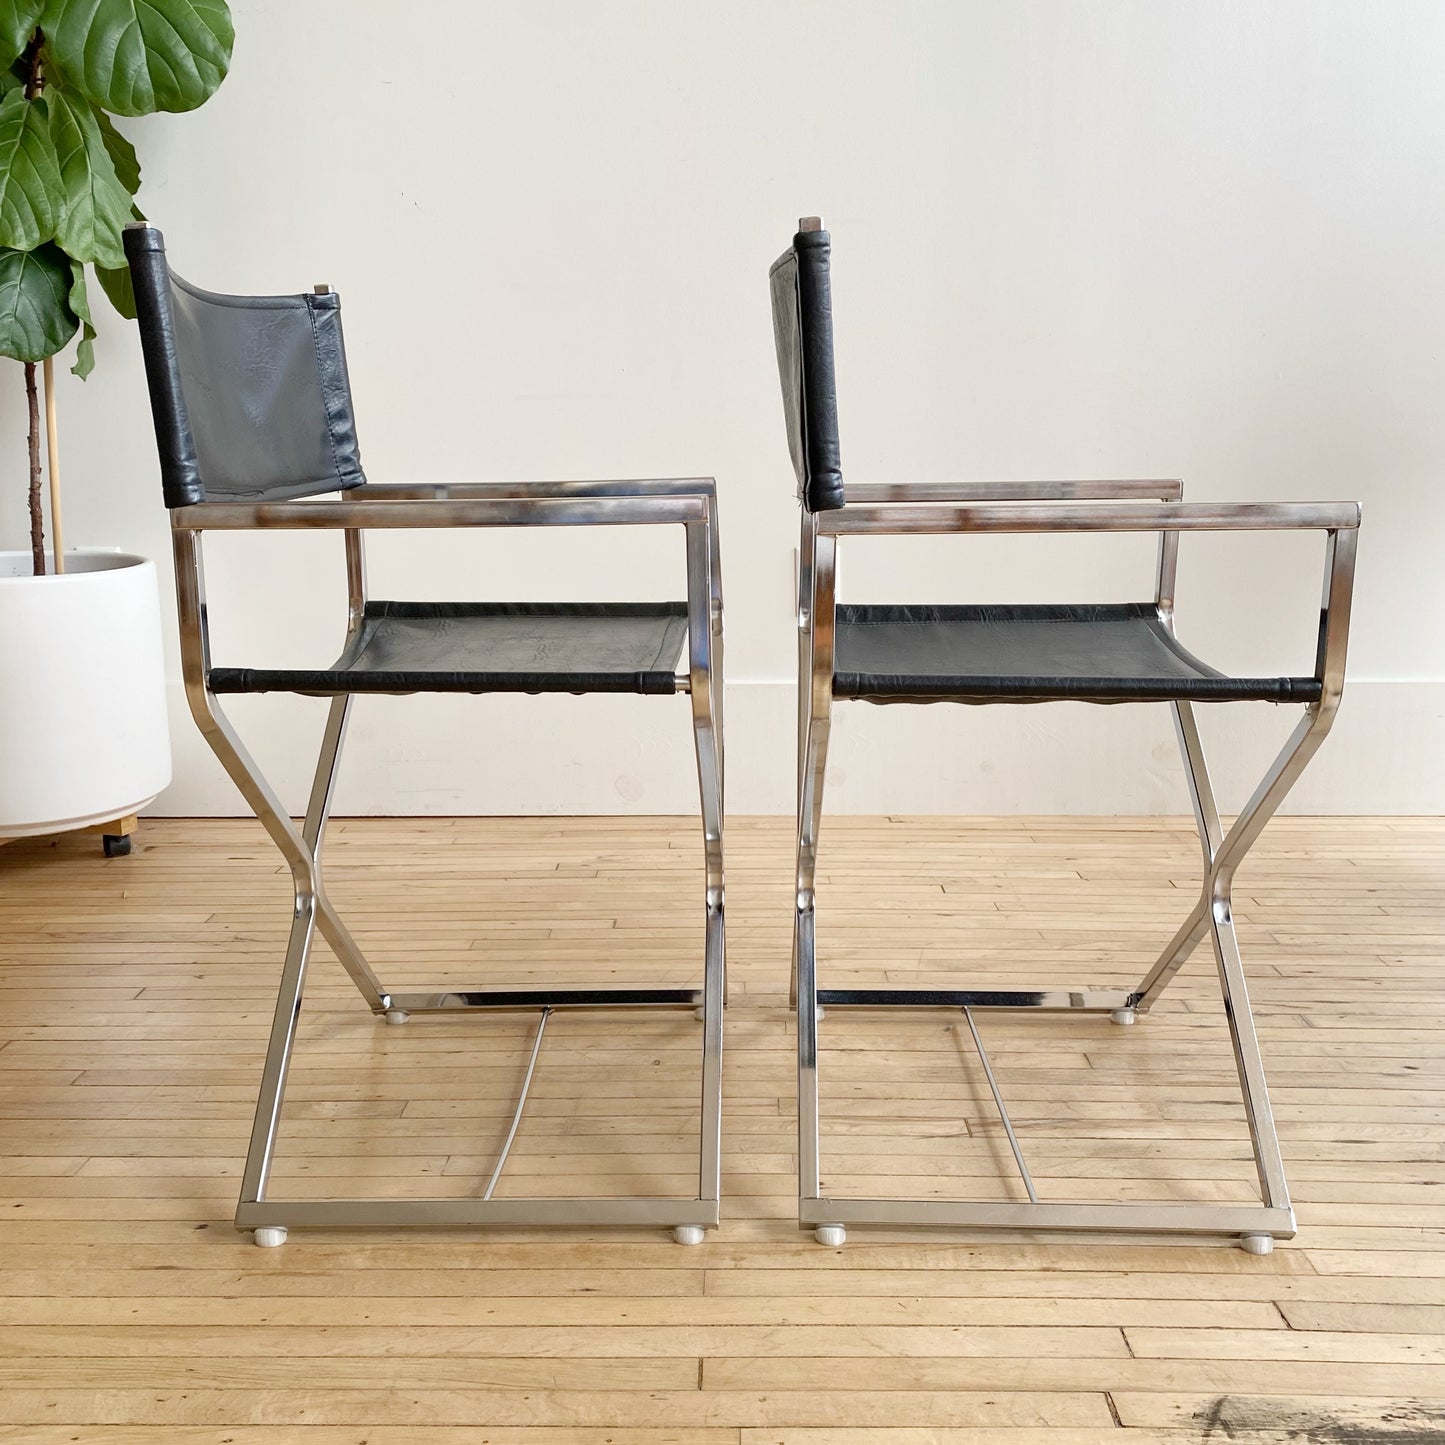 Pair of Vintage Chrome + Vegan Leather Director's Chairs